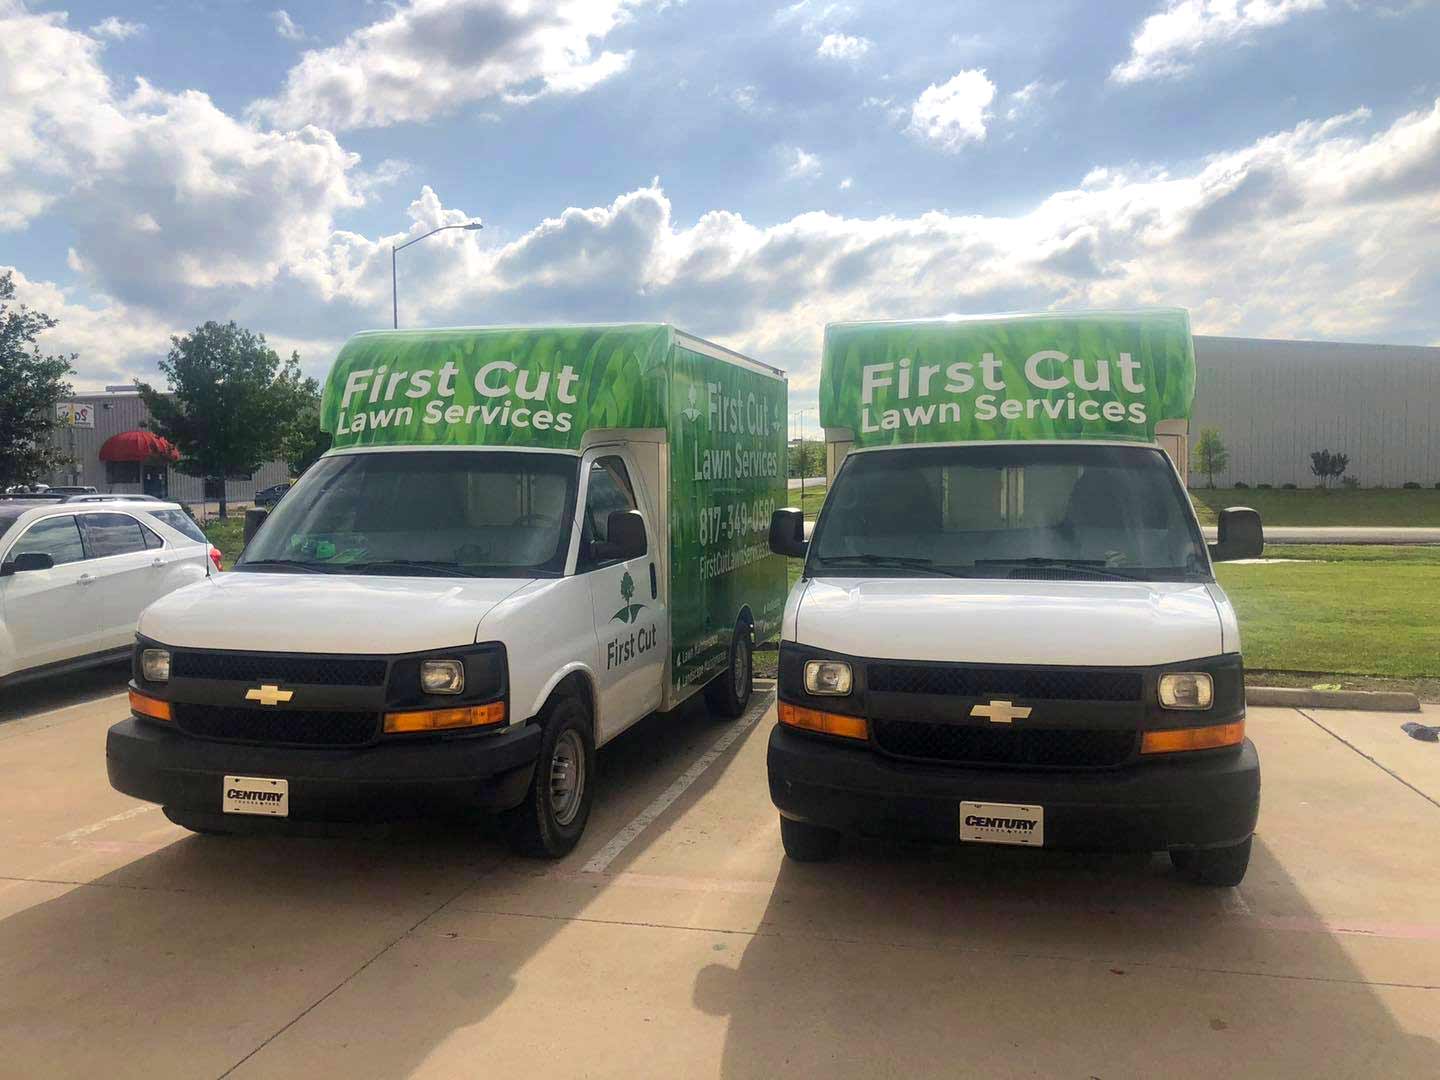 First Cut Lawn Services trucks in Fort Worth, TX.